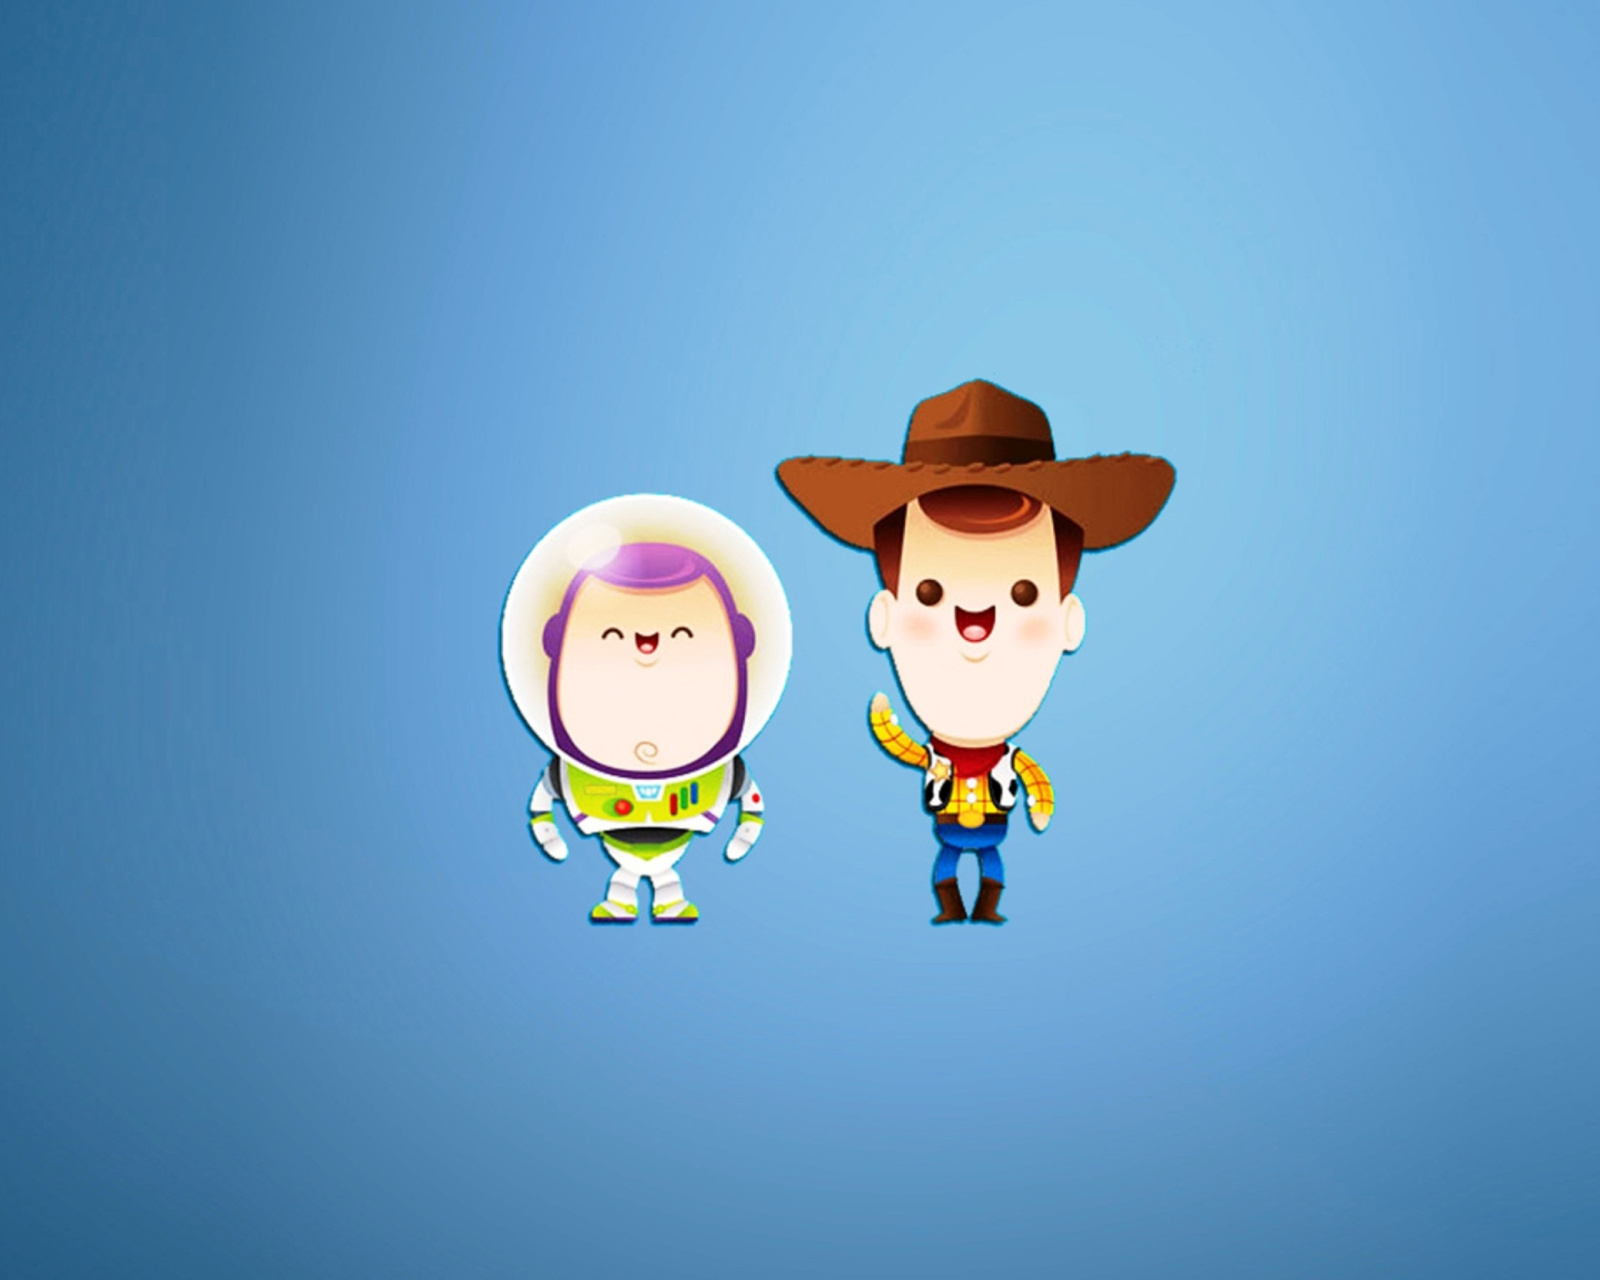 Buzz and Woody in Toy Story wallpaper 1600x1280